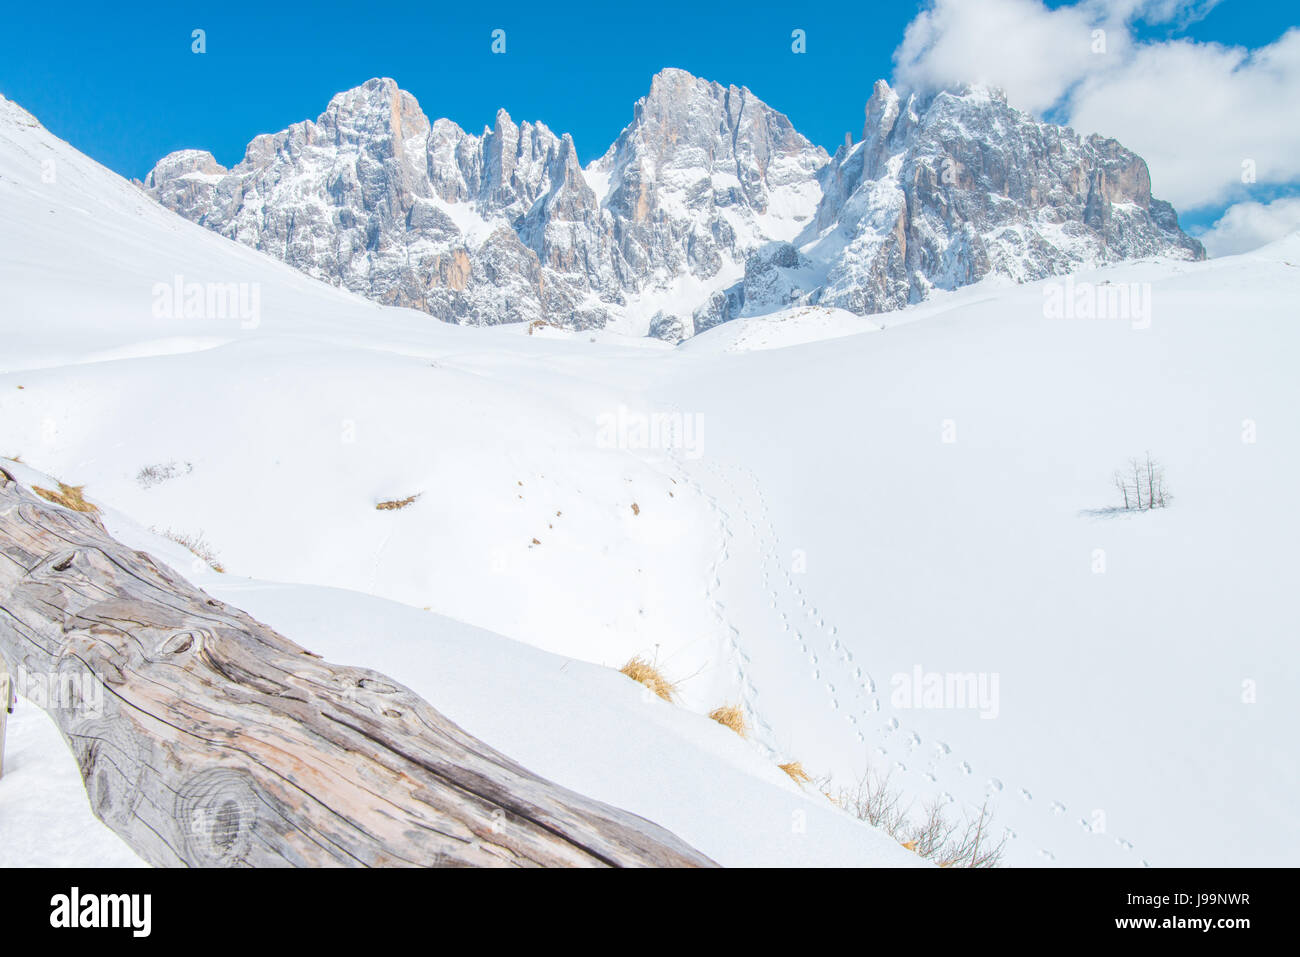 An old wooden log, fence stays in the foreground to some amazing, rugged mountains in the Italian Dolomites - Fresh powder on the trail Stock Photo